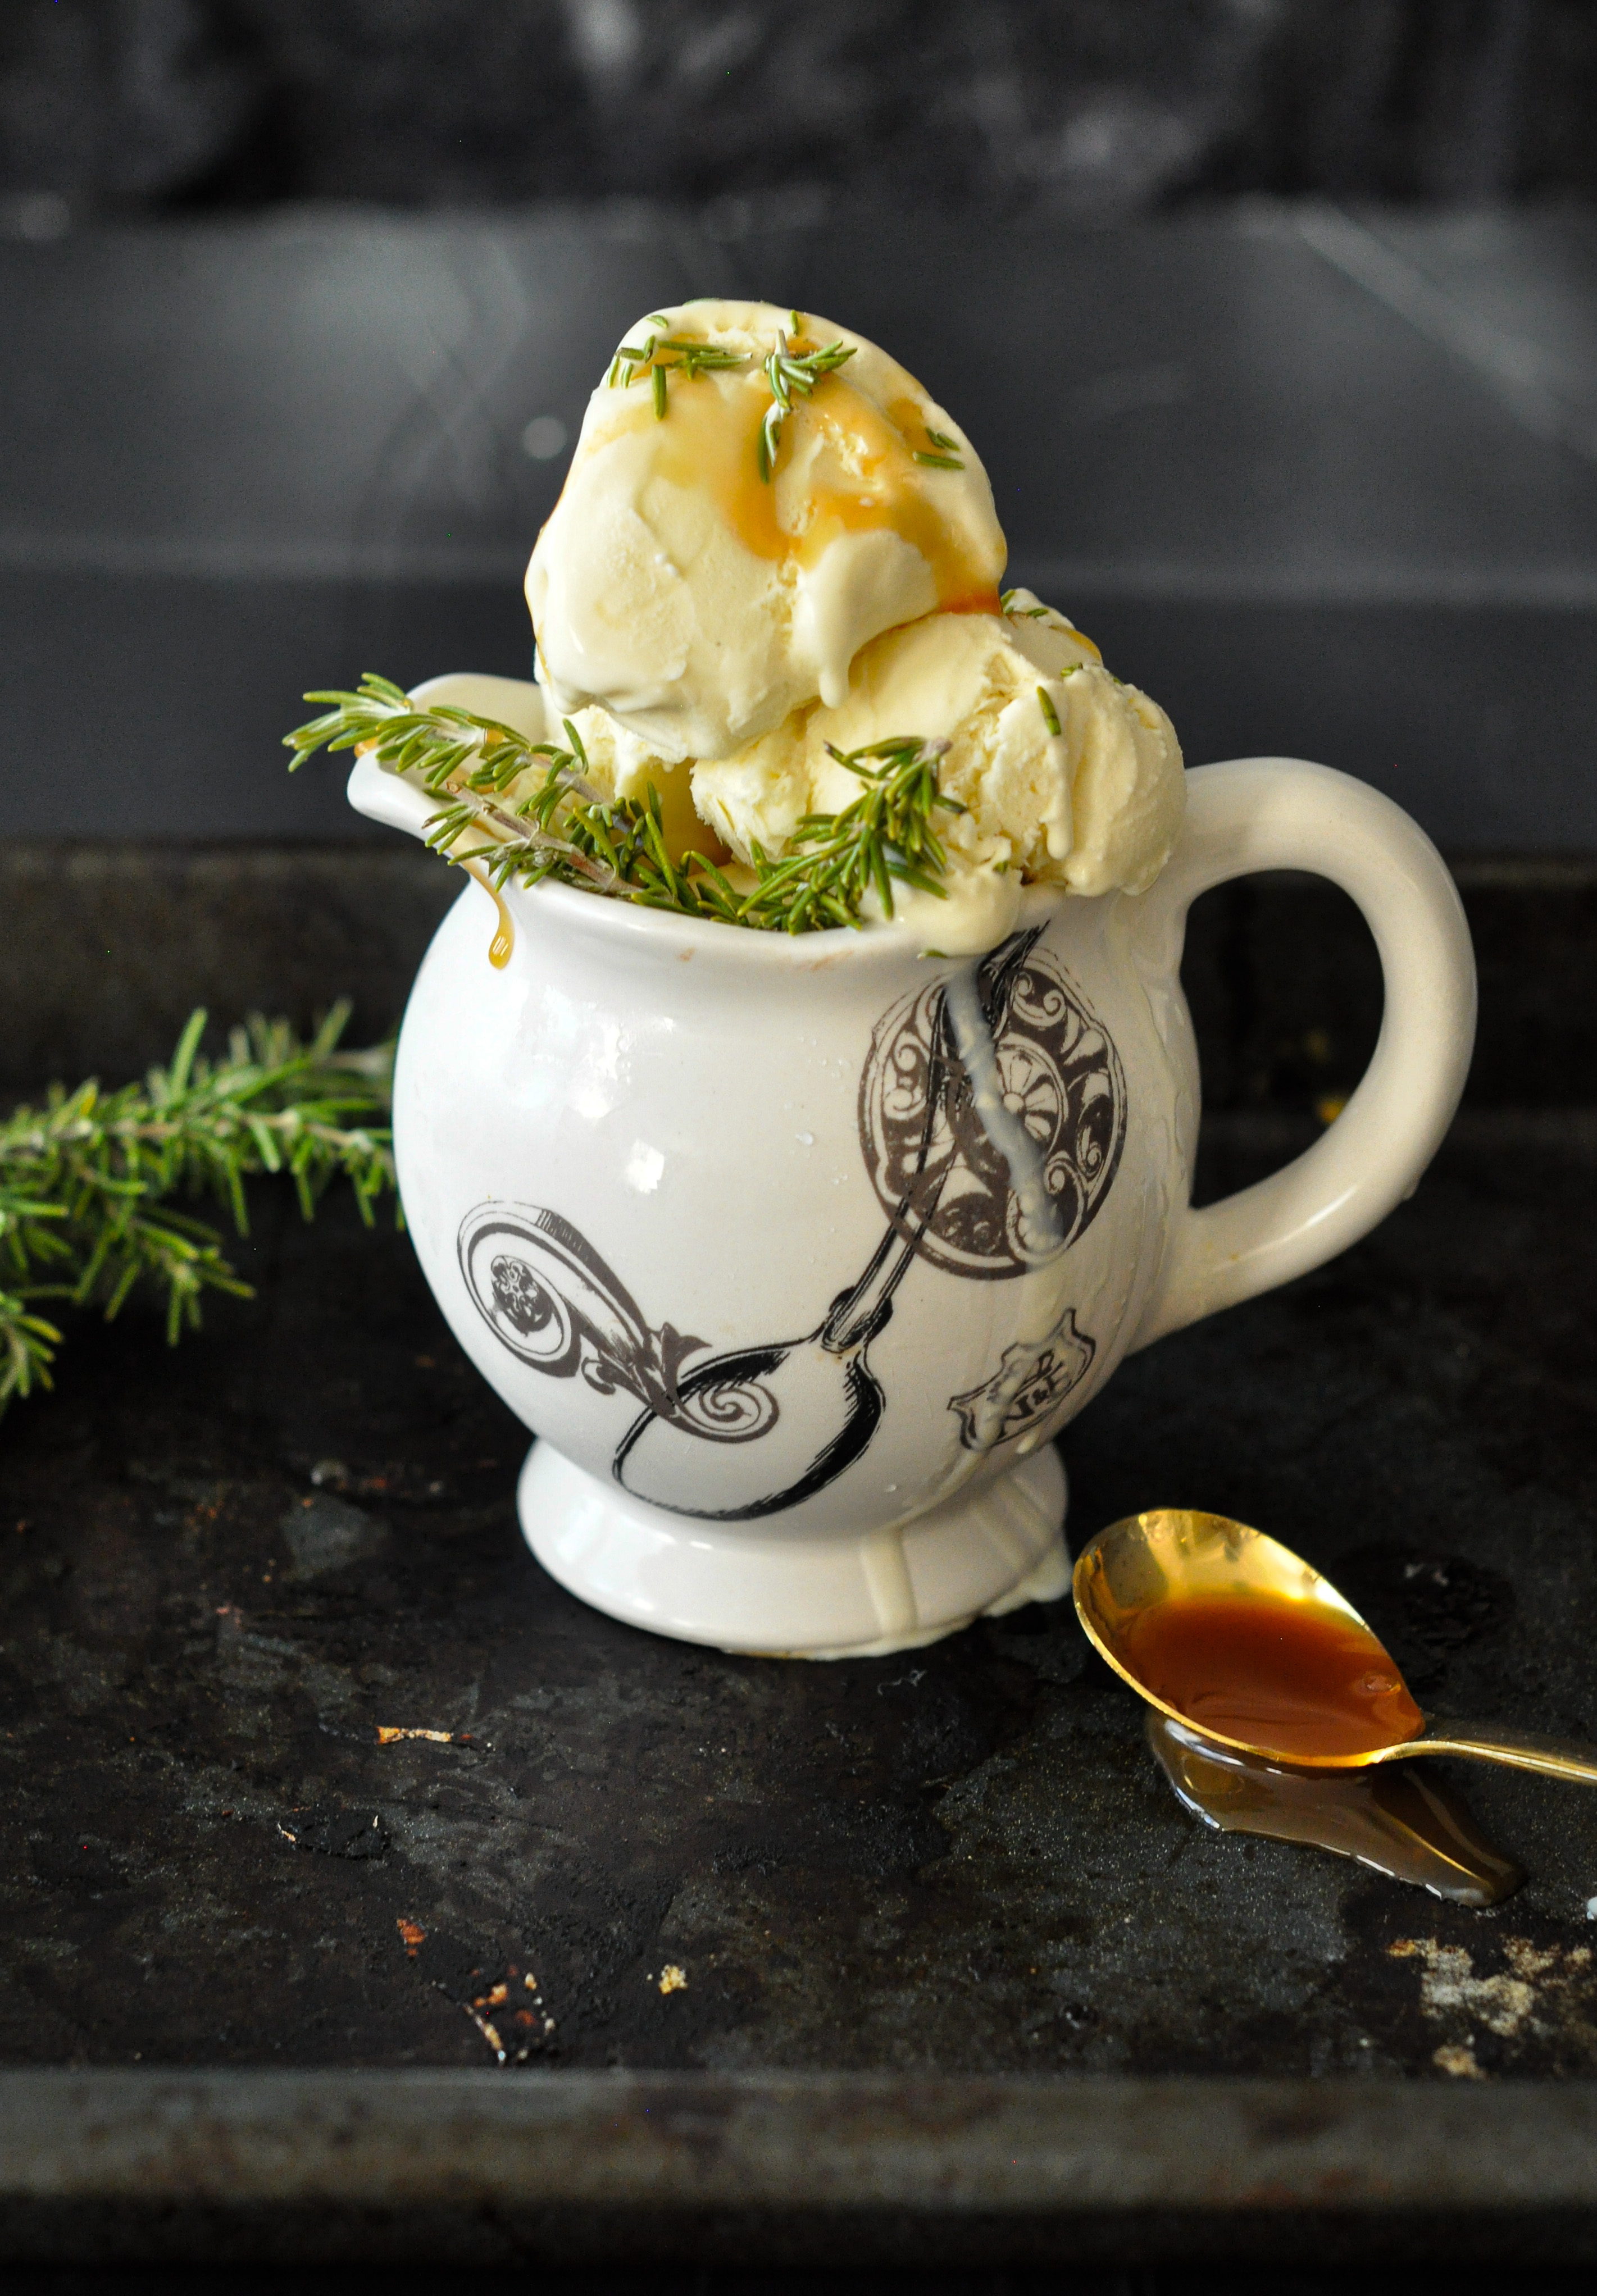 Easy no machine, no churn honey ice cream made with local honey and topped with a homemade rosemary herb syrup. A favorite summer treat that you can make with your kids at home.